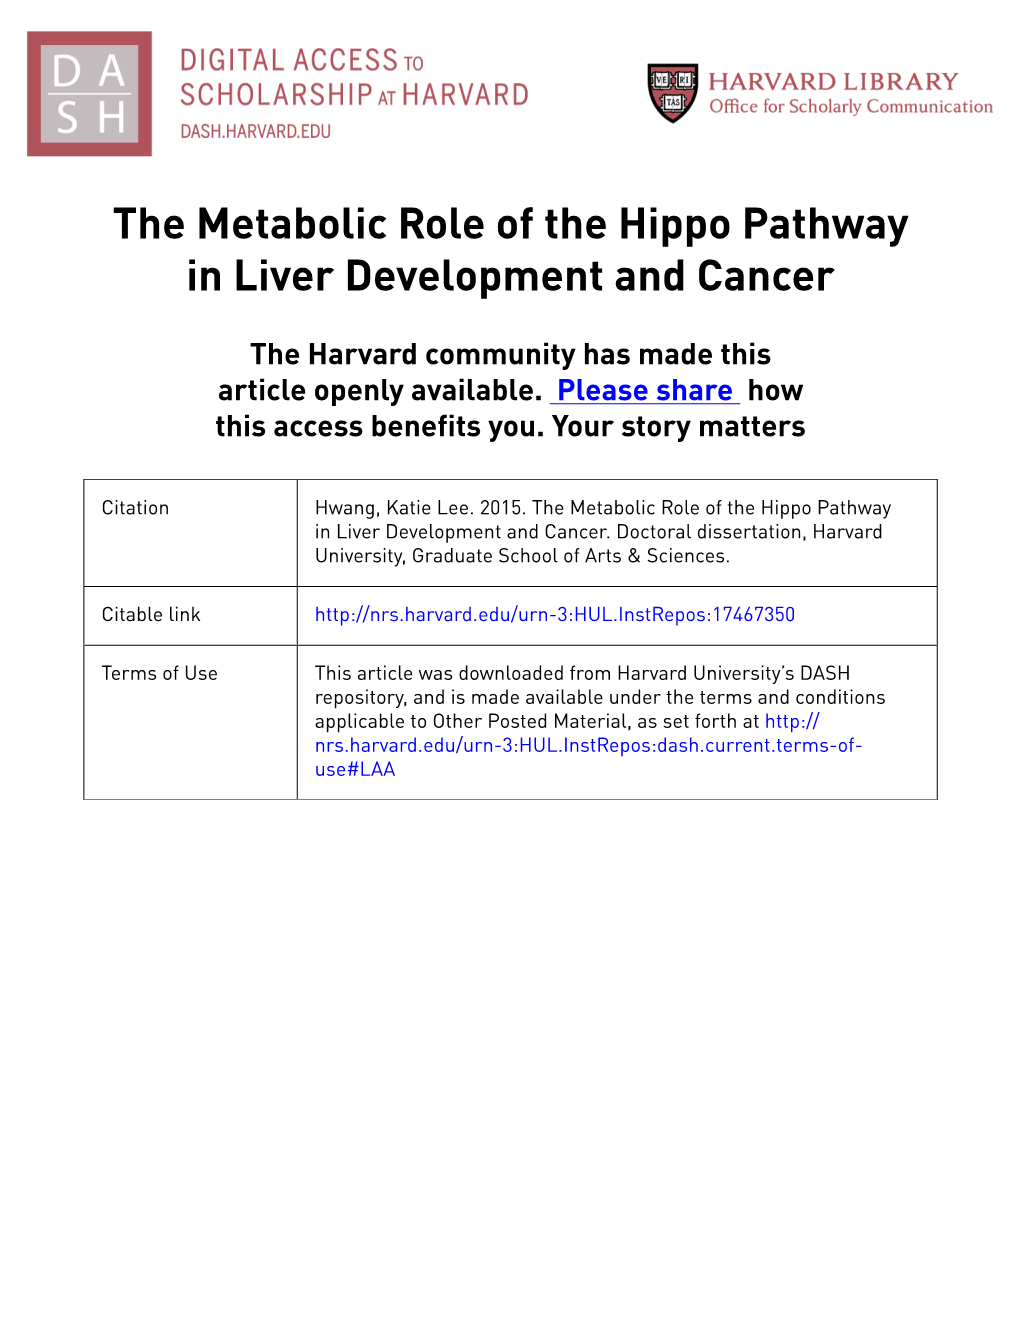 The Metabolic Role of the Hippo Pathway in Liver Development and Cancer